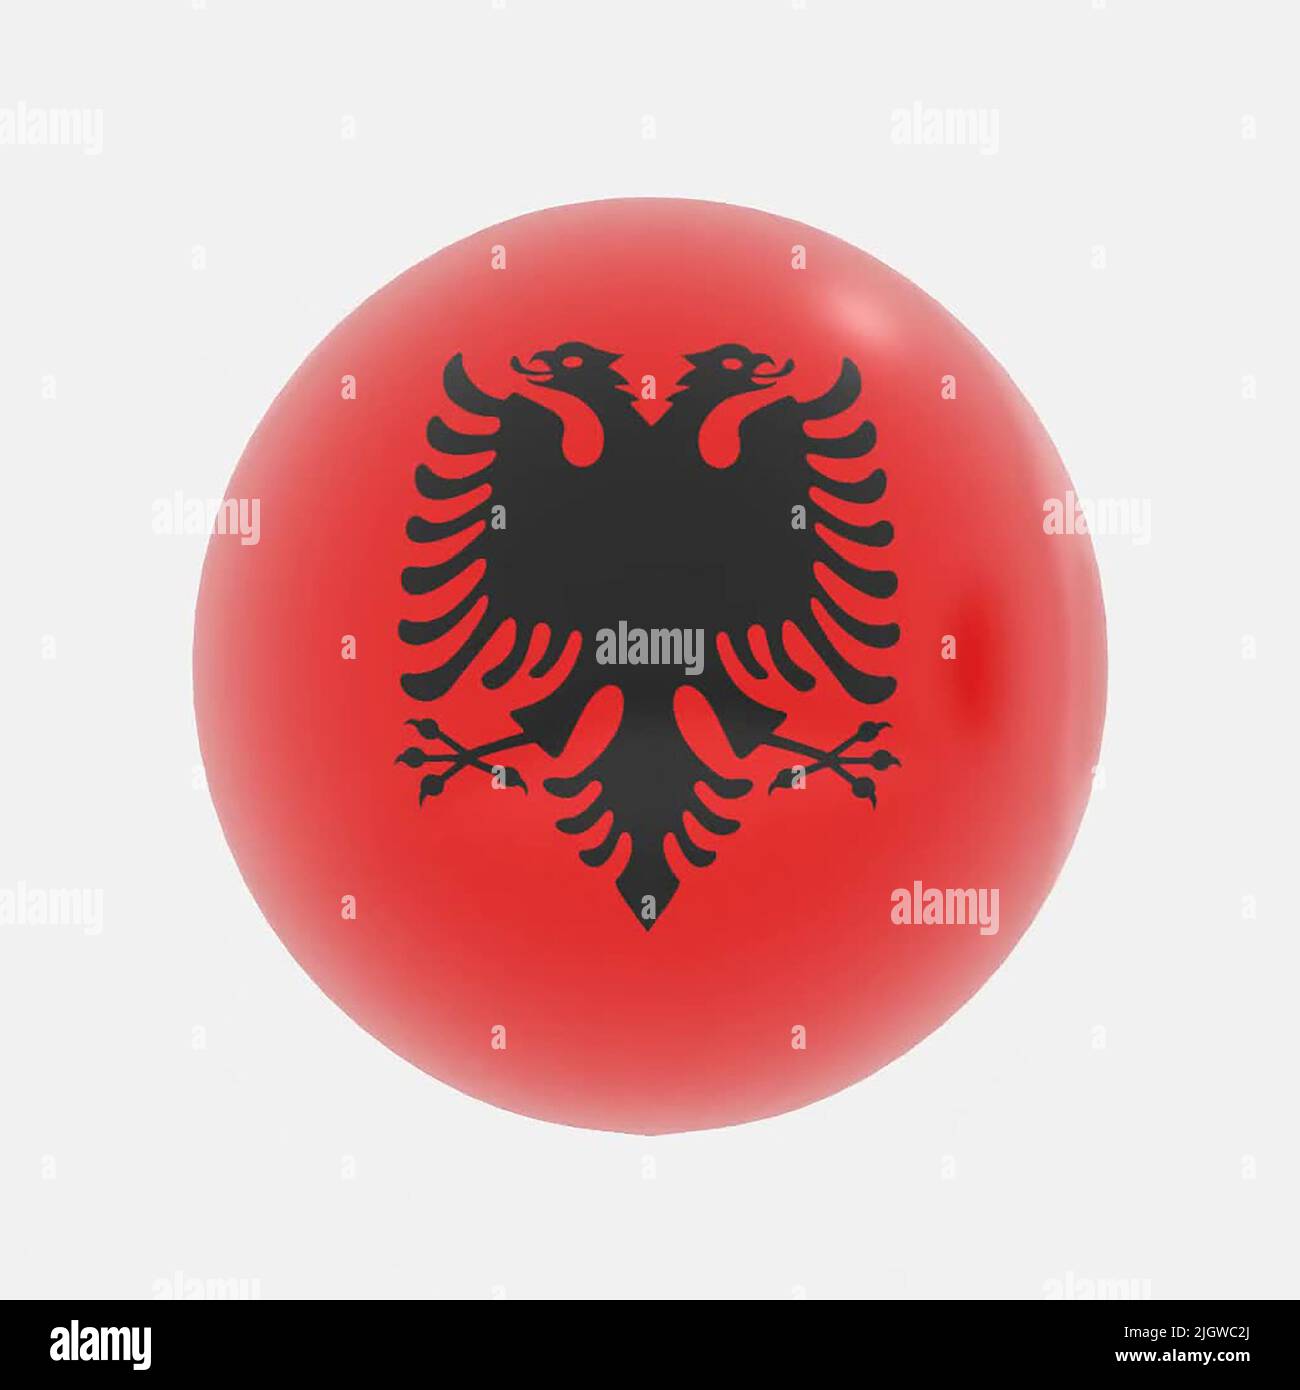 3d render of globe in Albania flag for icon or symbol. Stock Photo